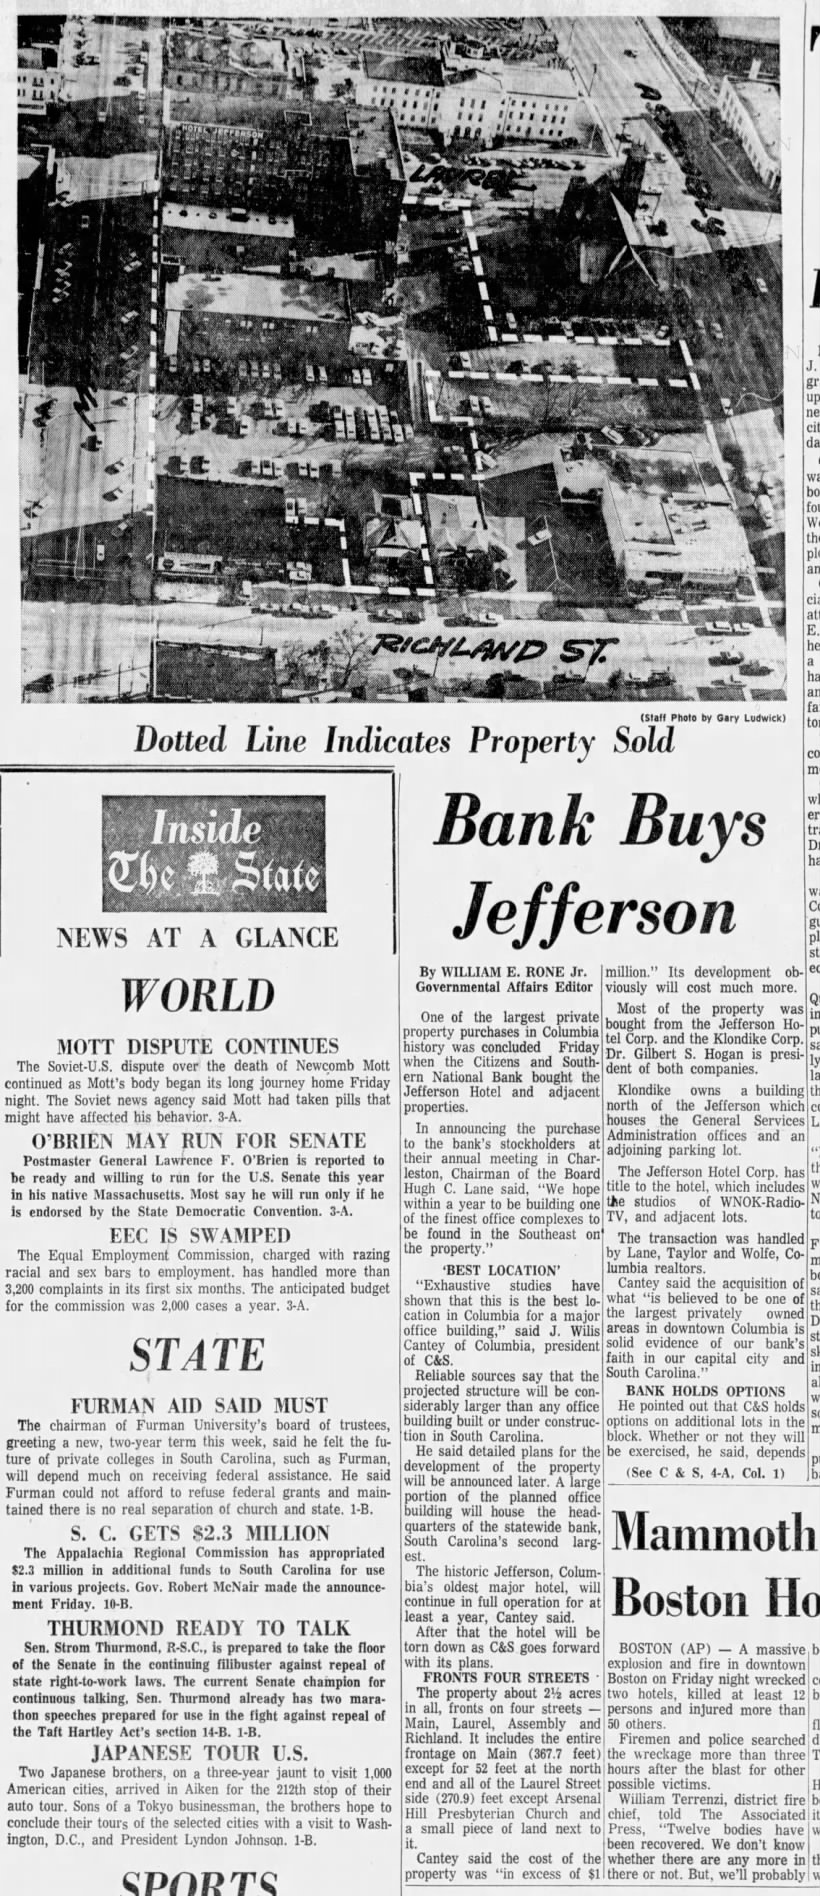 Dotted Line Indicates Property Sold: Bank Buys Jefferson